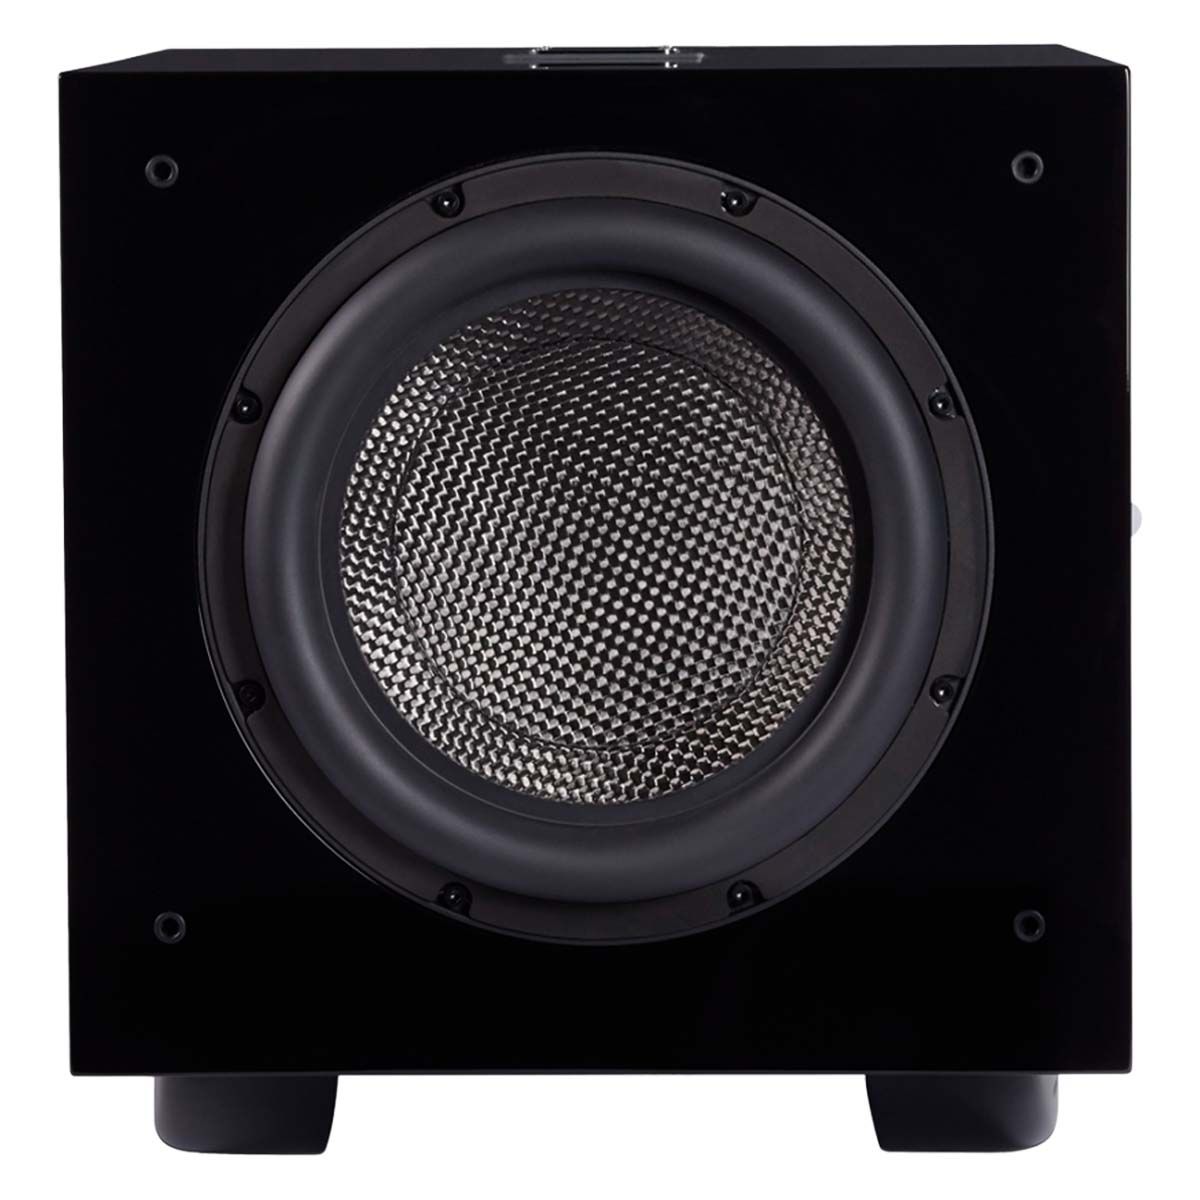 REL Serie S Carbon Special Subwoofer - Piano Black front view without grille